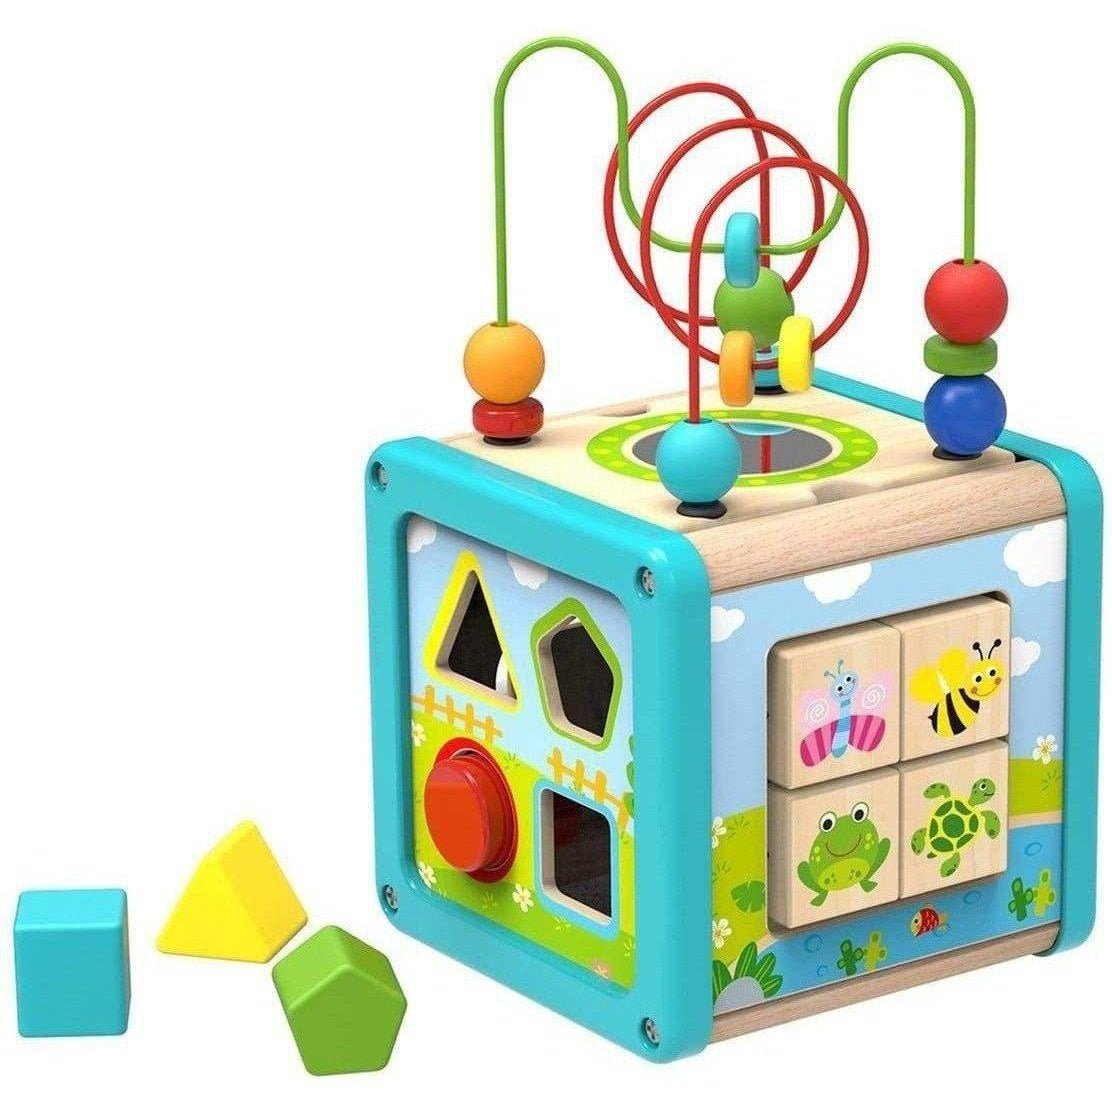 Buy Play Cube Activity Toy for Kids